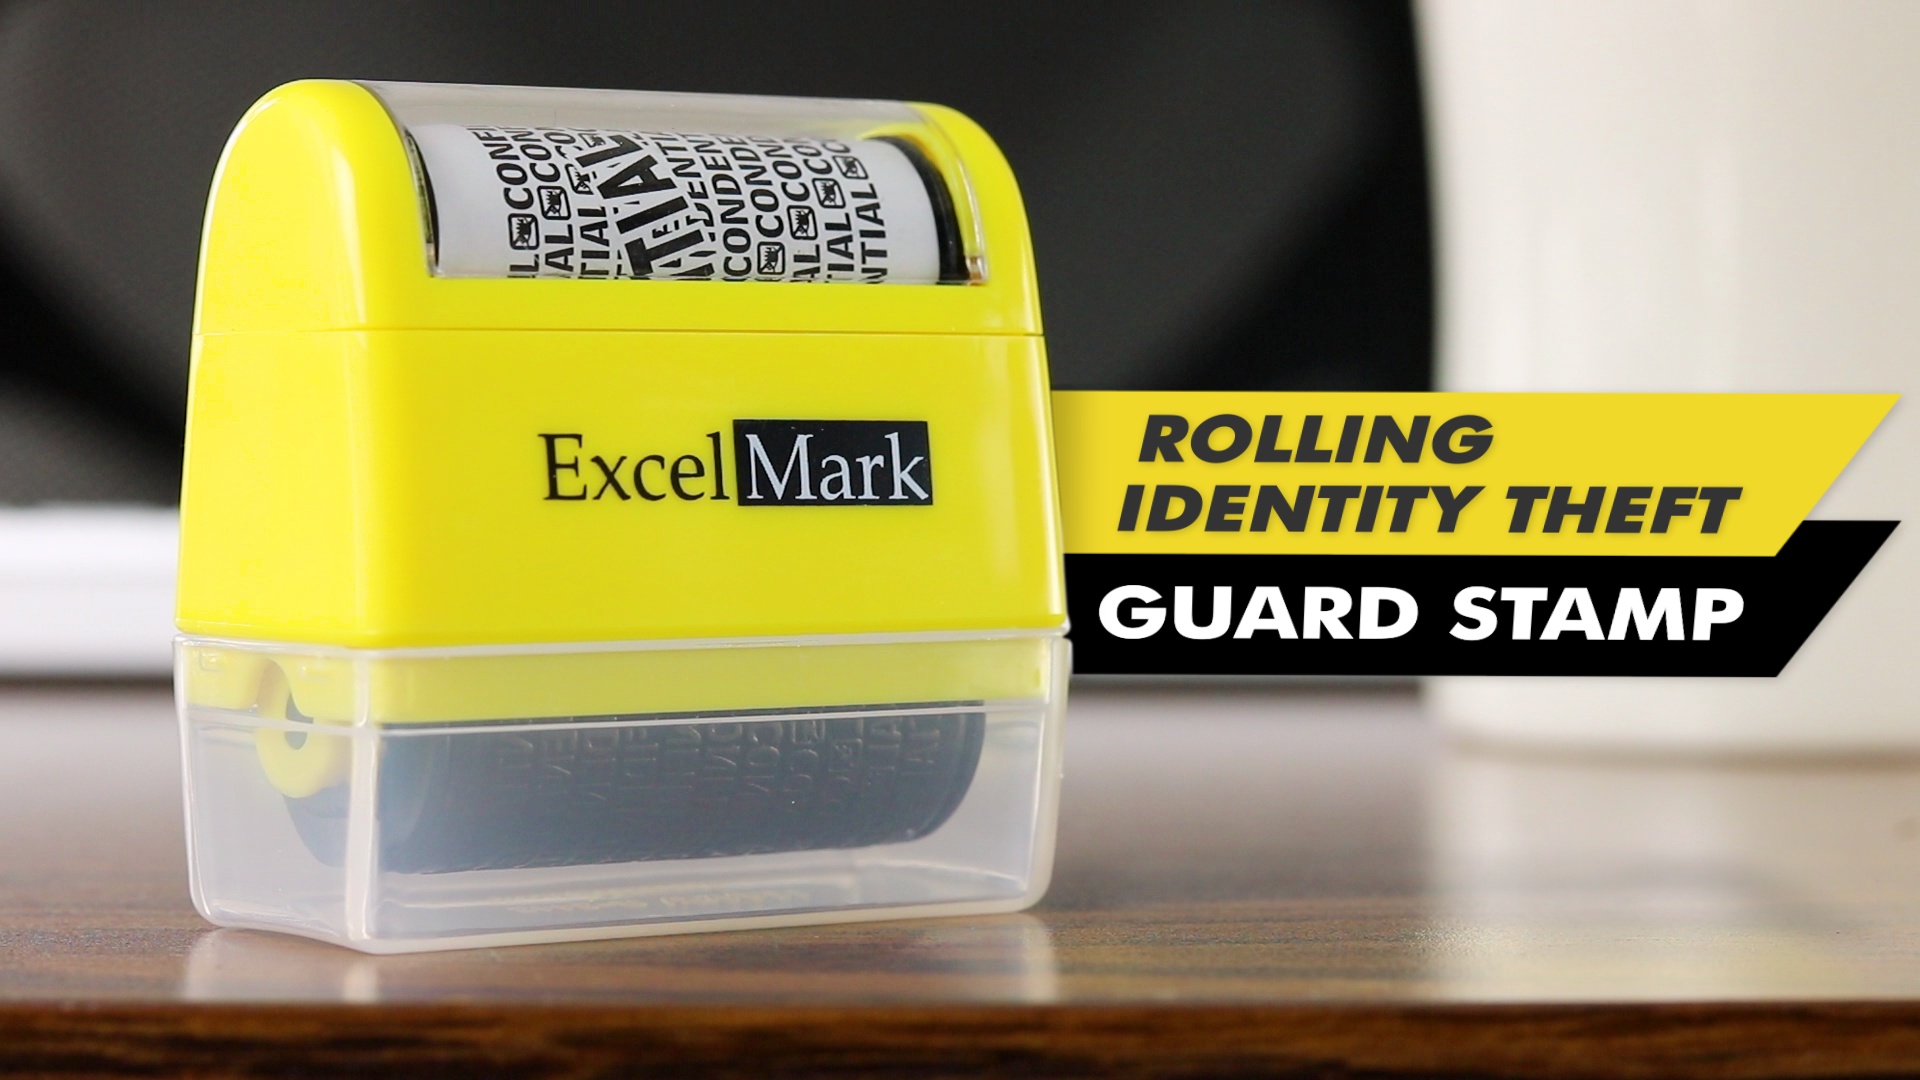 Roller stamp data security protection theft prevention id identity guard roBFLA 